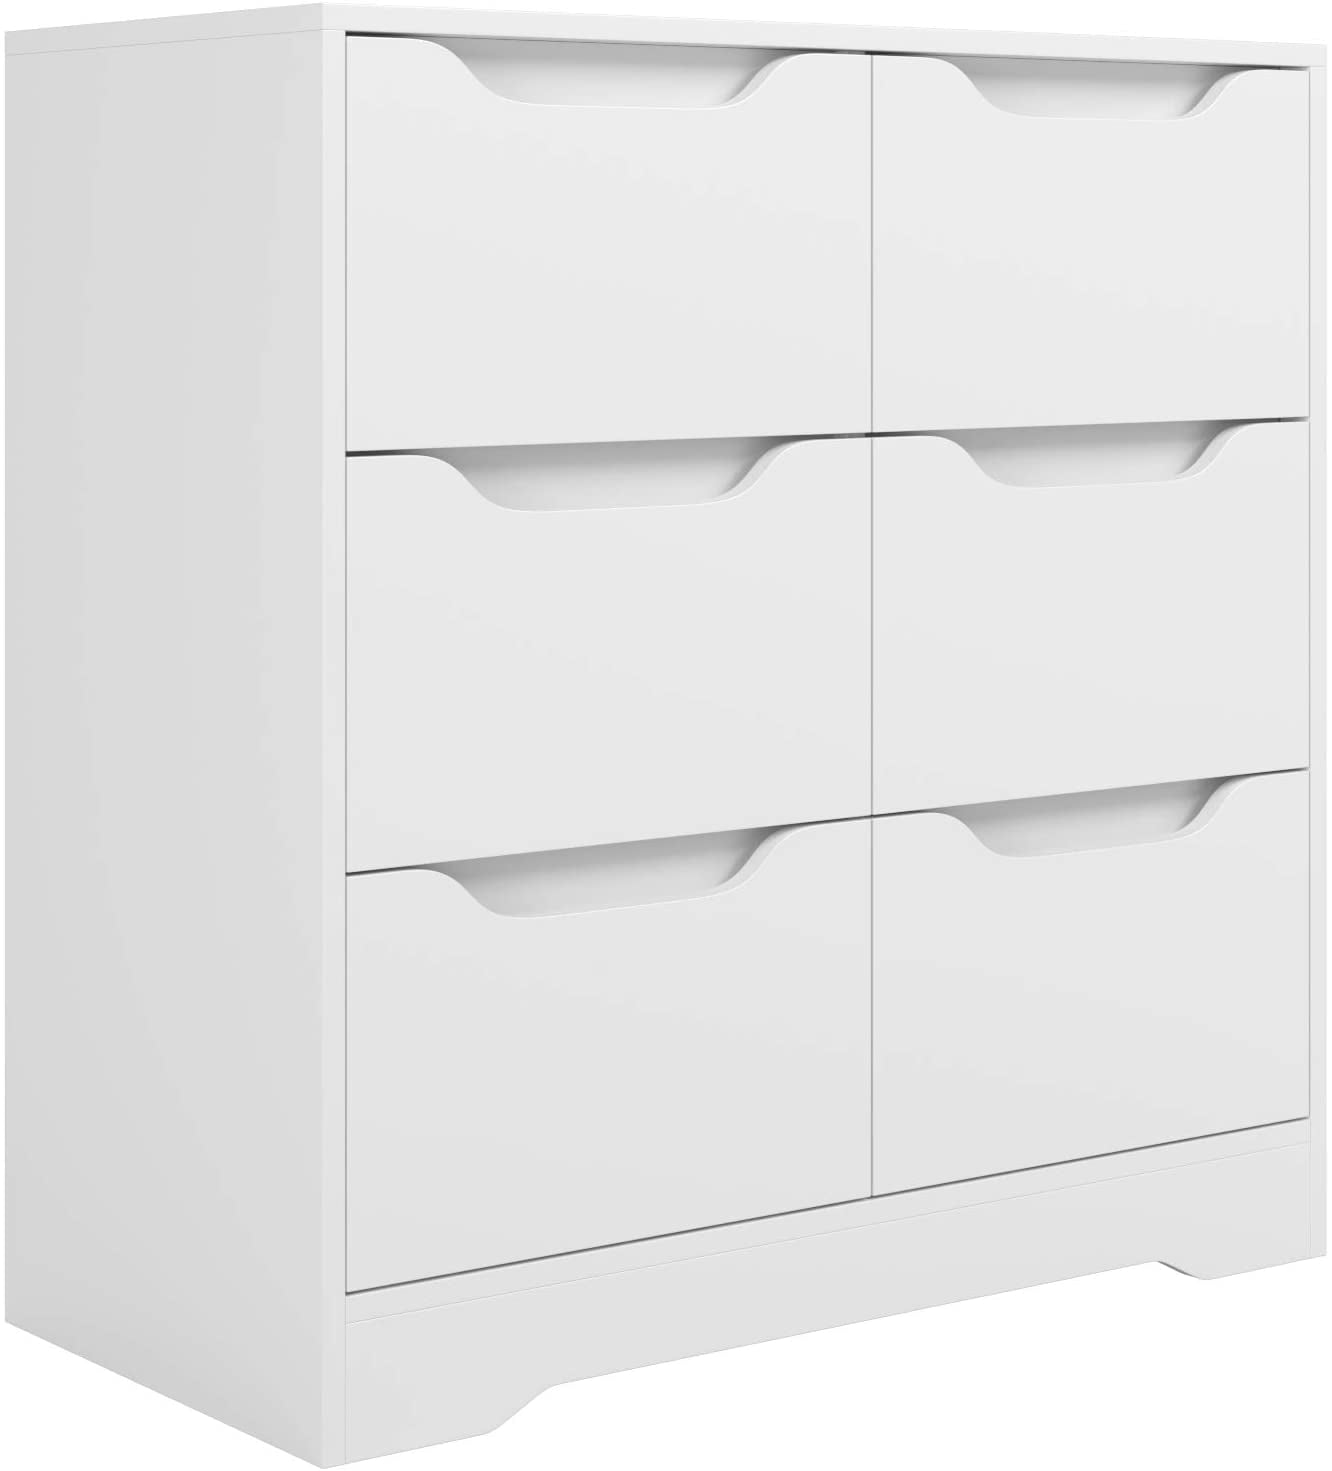 HOSTACK 5 Drawer Dresser with Door, White Storage Cabinet with Drawers and  Shelves, Wide Wood Dresser, Modern Chest of Drawers Organizers for Living